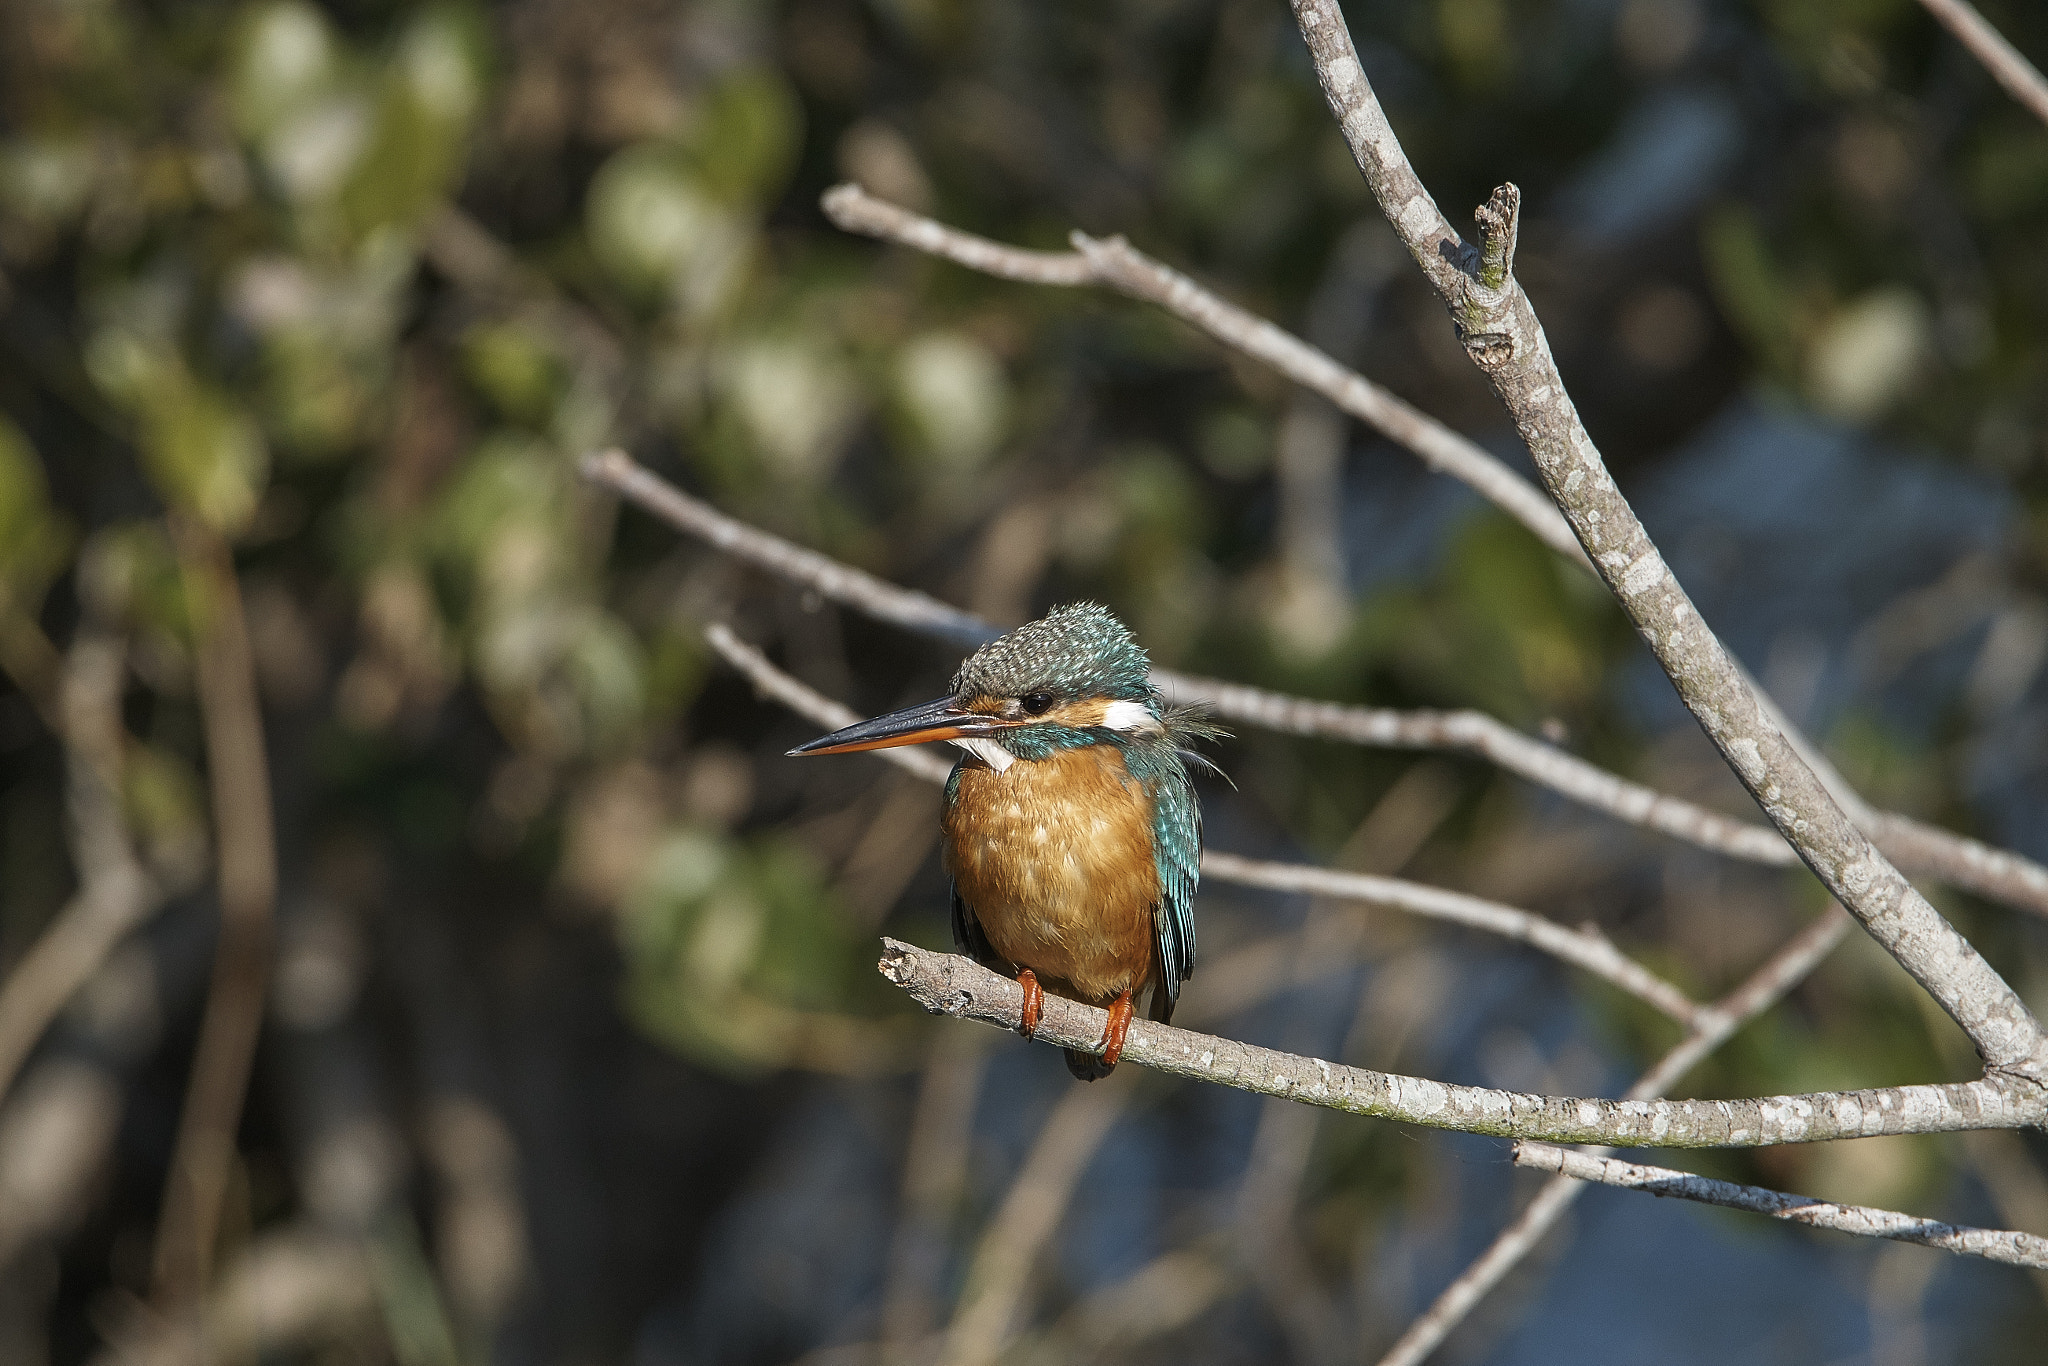 Sony a6000 sample photo. River kingfisher (alcedo atthis) photography